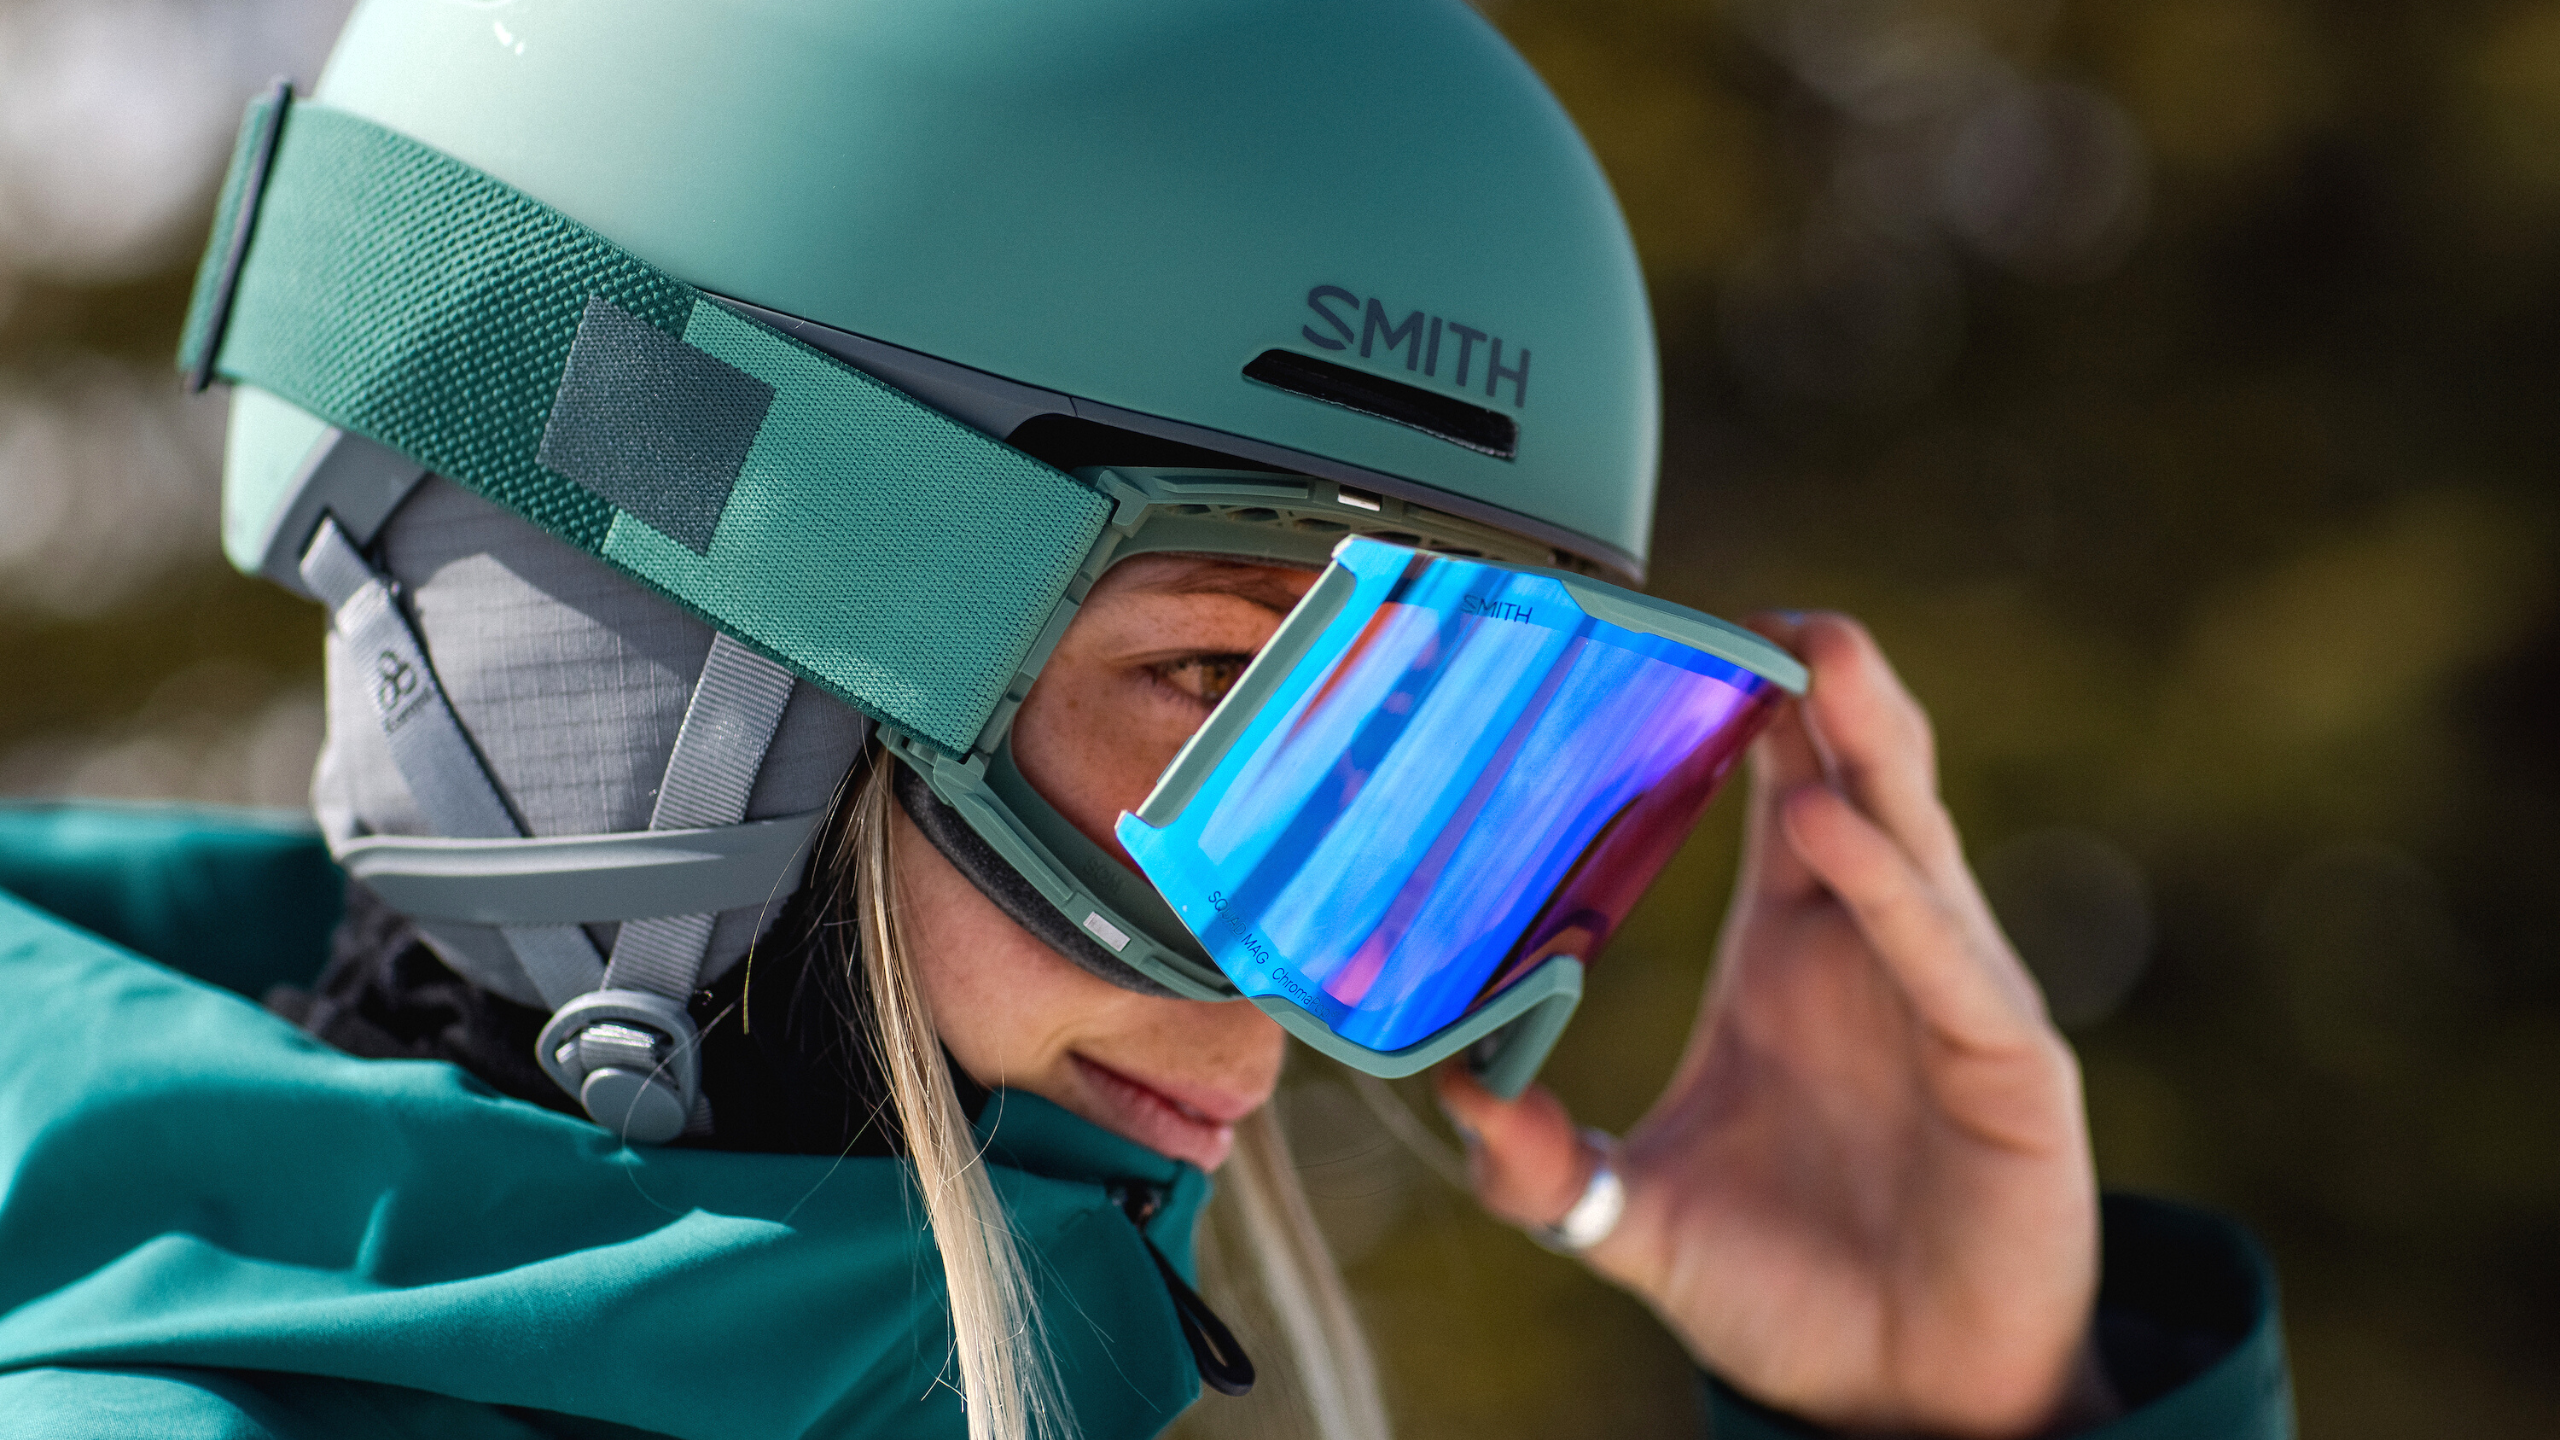 Andrea Byrne changing the lenses on Squad MAG goggle while wearing them.